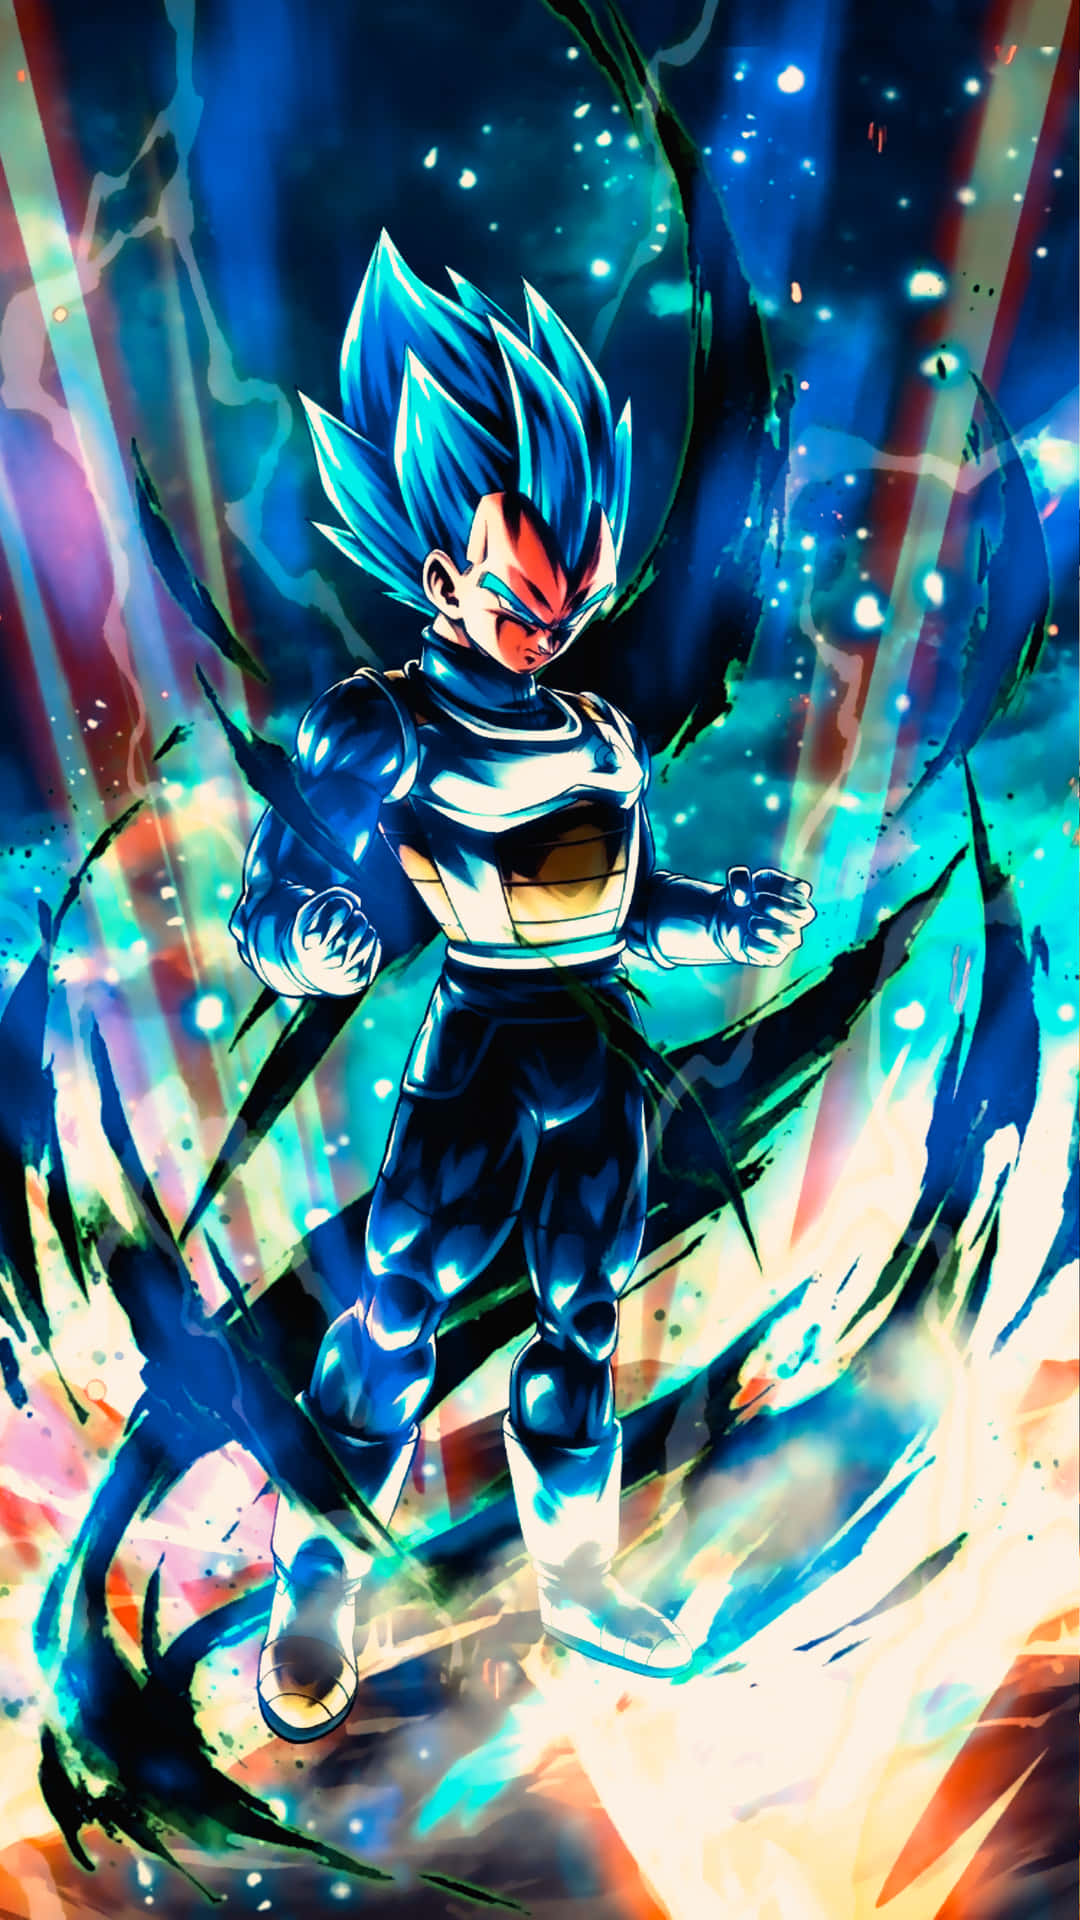 Cool Vegeta shows off his mighty strength Wallpaper